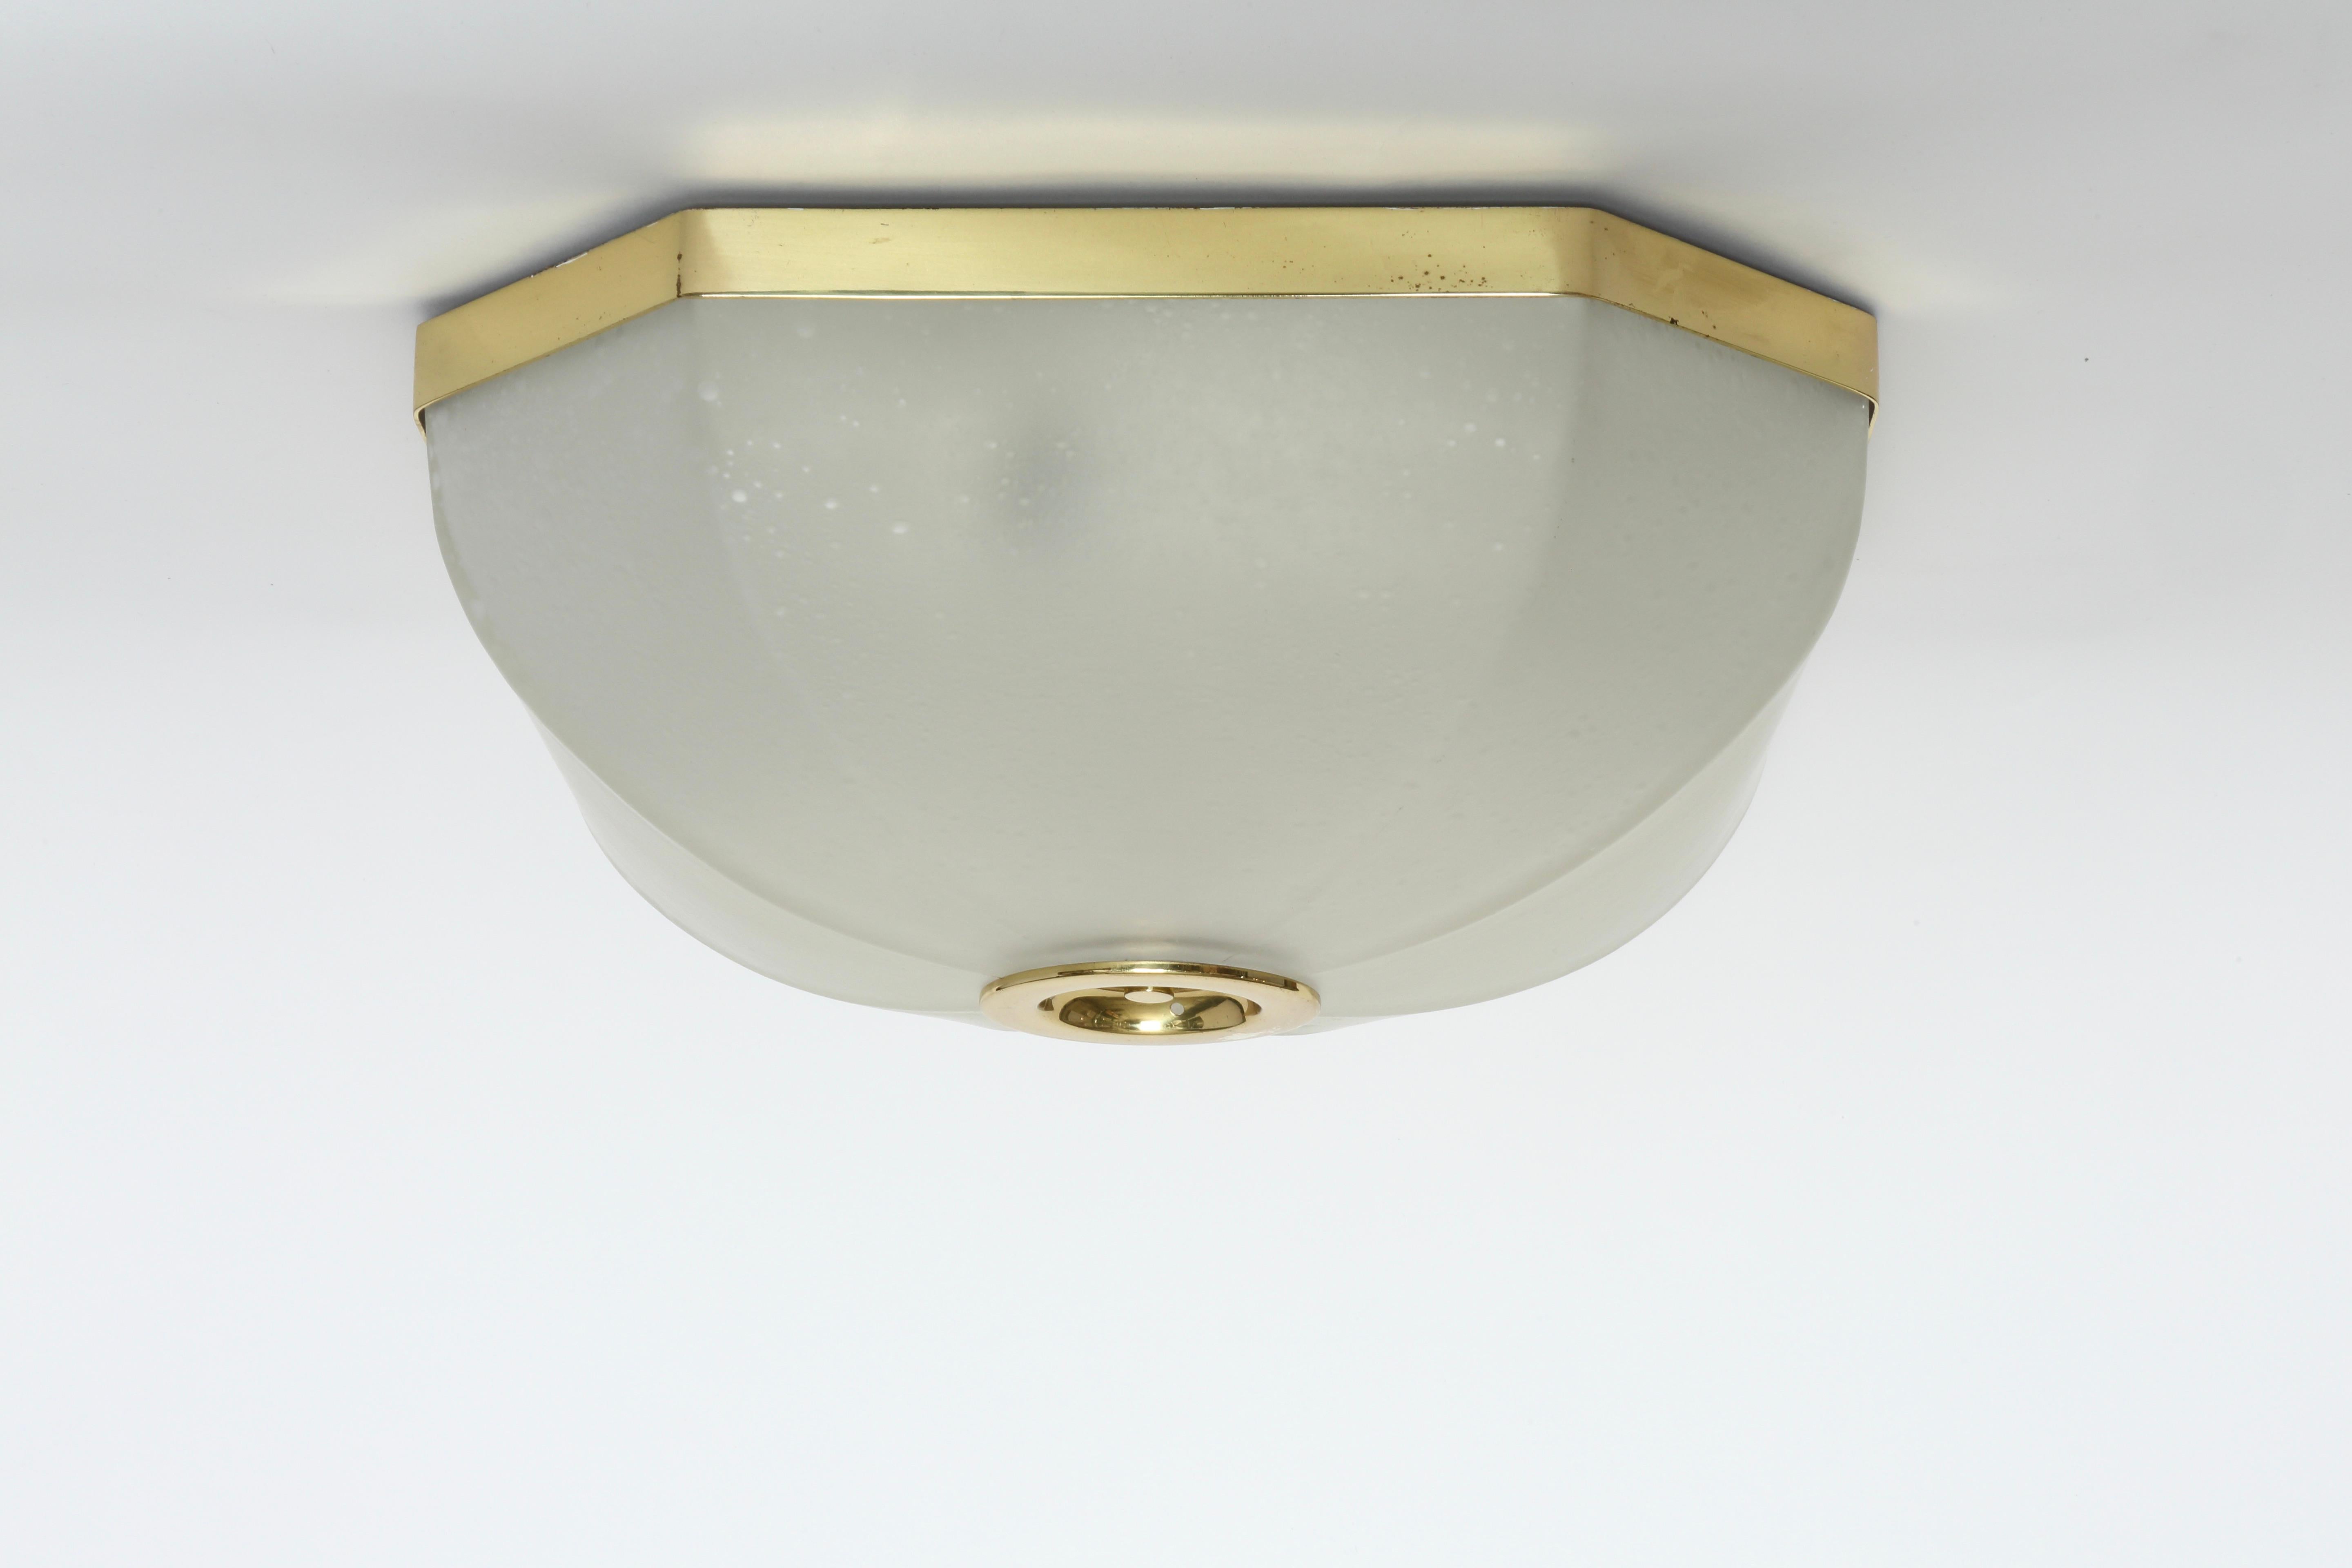 Flush mount ceiling light by Lumi.
Made in Italy, in 1950s.
Label present.
Four standard Edison bulbs.
Complimentary US rewiring upon request.
Two flush mounts available.

We take pride in bringing vintage fixtures to their full glory again.
At